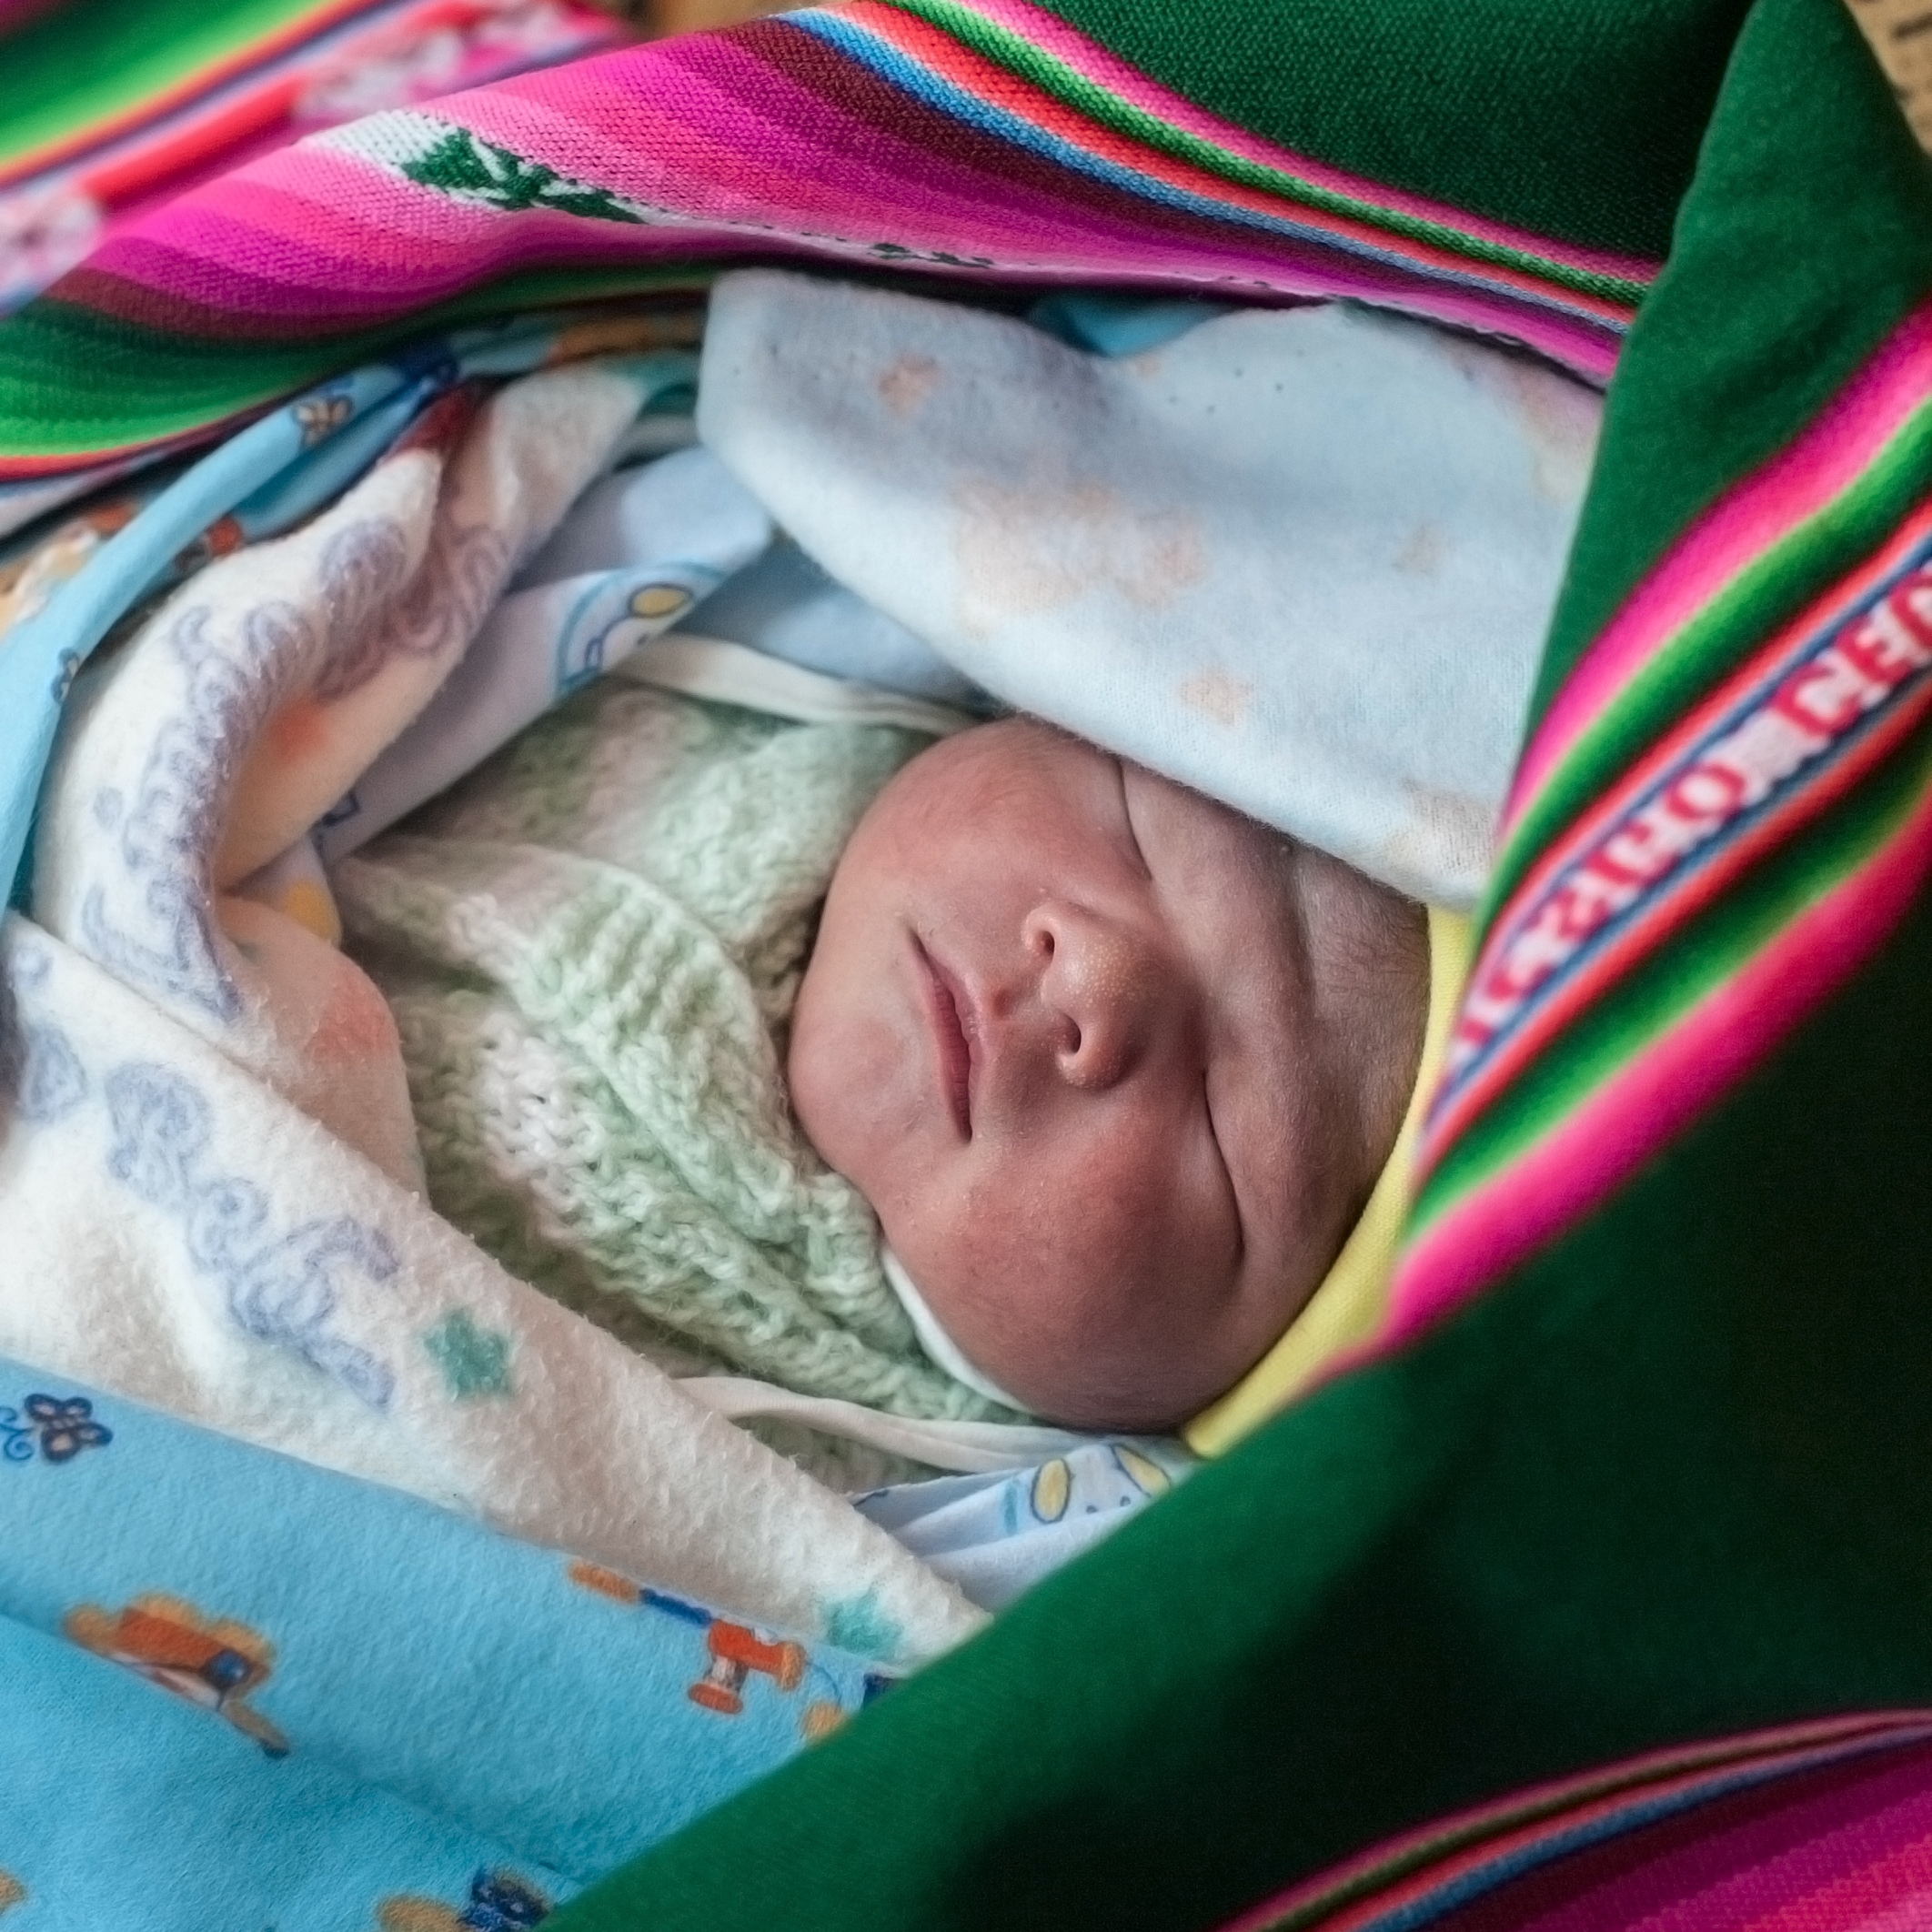 Healthy newborn Emanuel, a brand new, one-day-old baby, here in his colorful aguayo, and his mother Liseth are alive and thriving, thanks to your support of our vital work in Bolivia. Photo Credit: Susan Warner/Save the Children 2015.